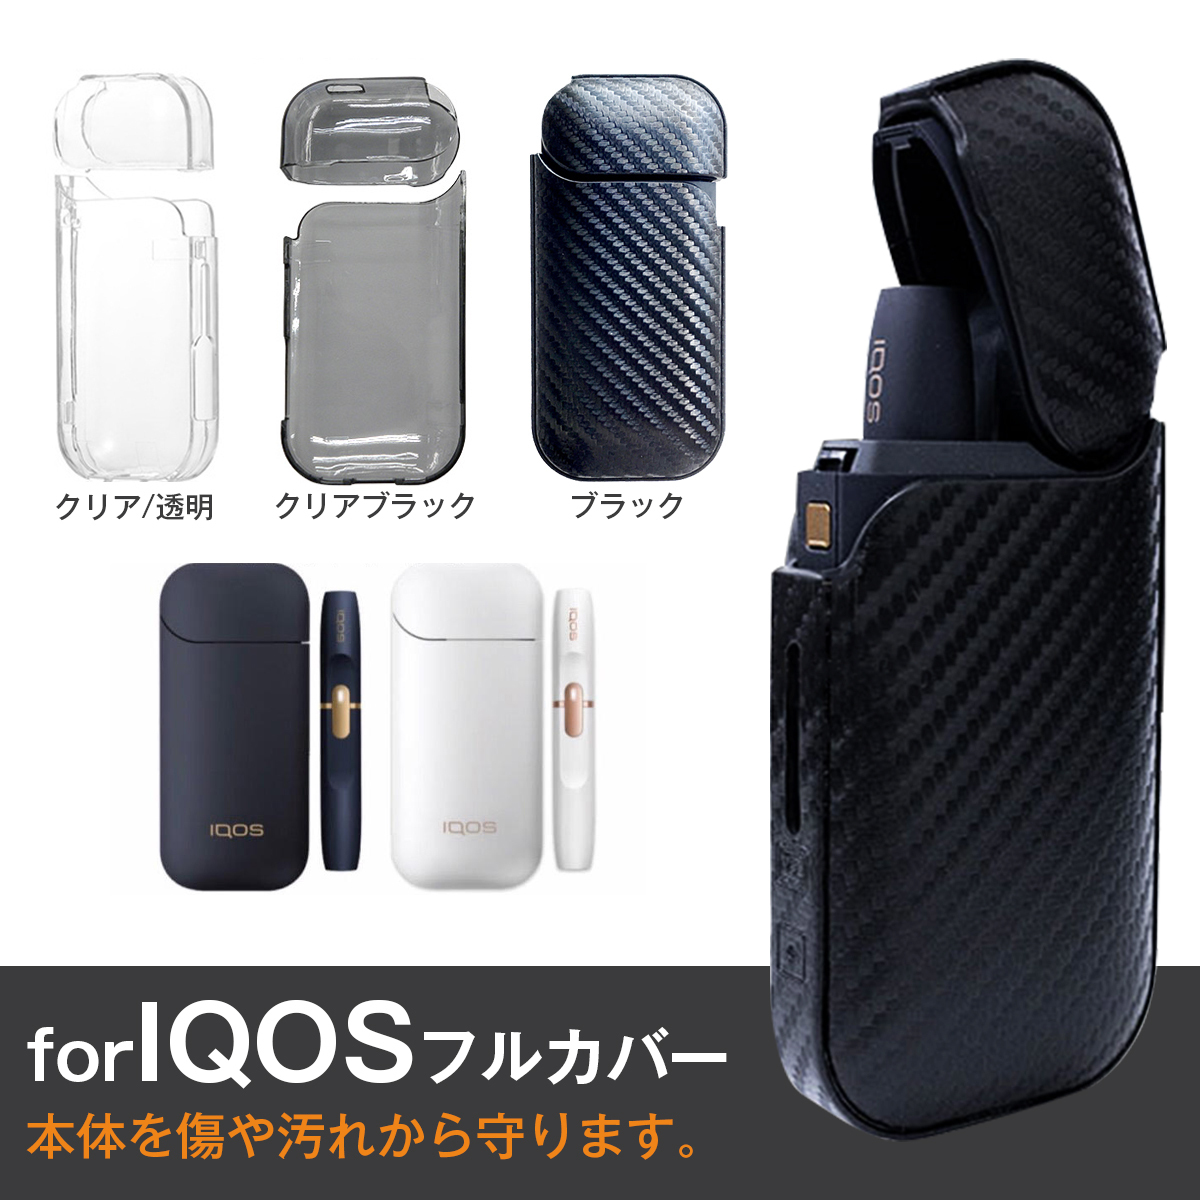 iQOS for full cover Iqos case leather style poly- car boneito black / black 